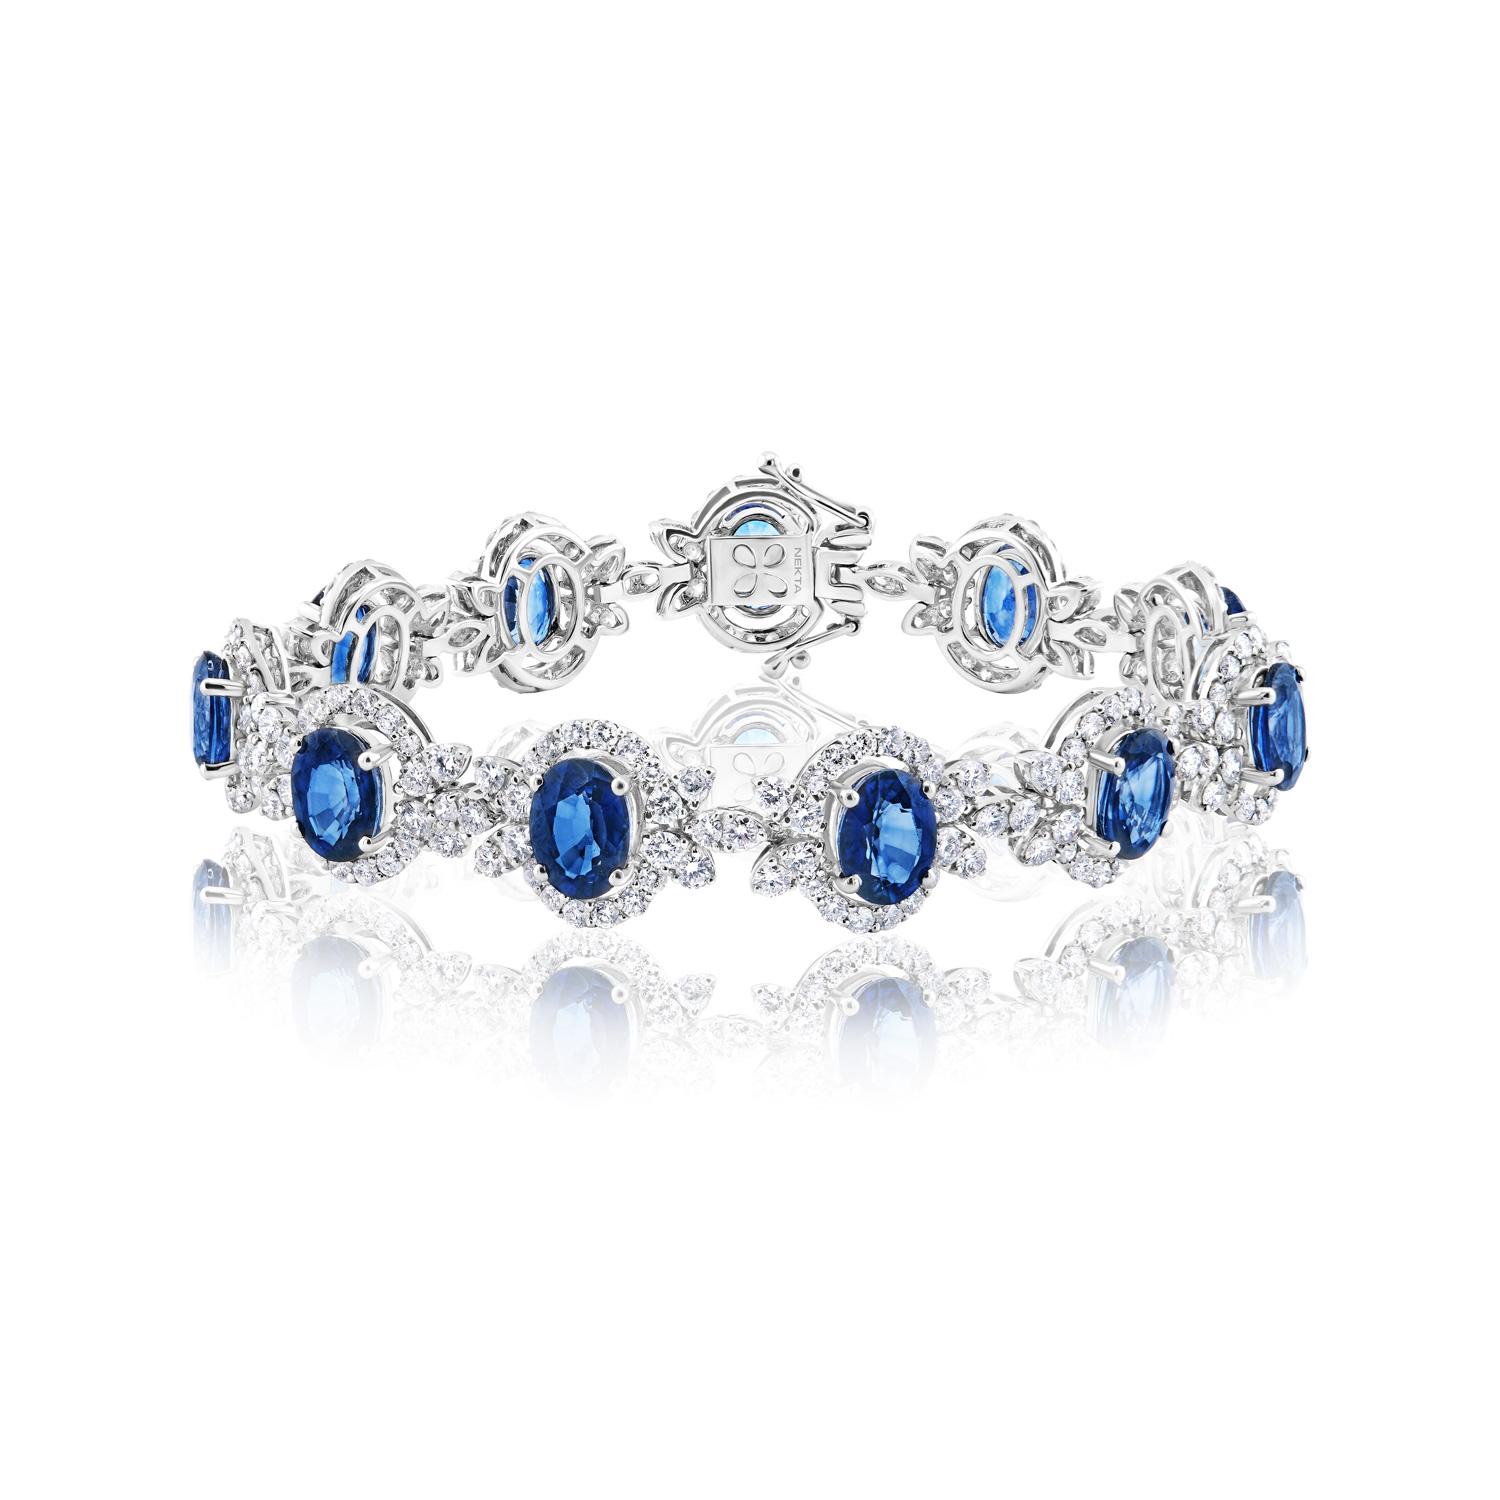 The Sadie 25 Carat Sapphire & Diamond Bracelet features OVAL CUT J'adore SAPPHIRE brilliants weighing a total of approximately 24.84 carats, set in 18K White Gold.

Style:
Sapphire Size: 17.56 Carats
Sapphire Shape: Oval Cut 

Halo Diamonds:
Diamond